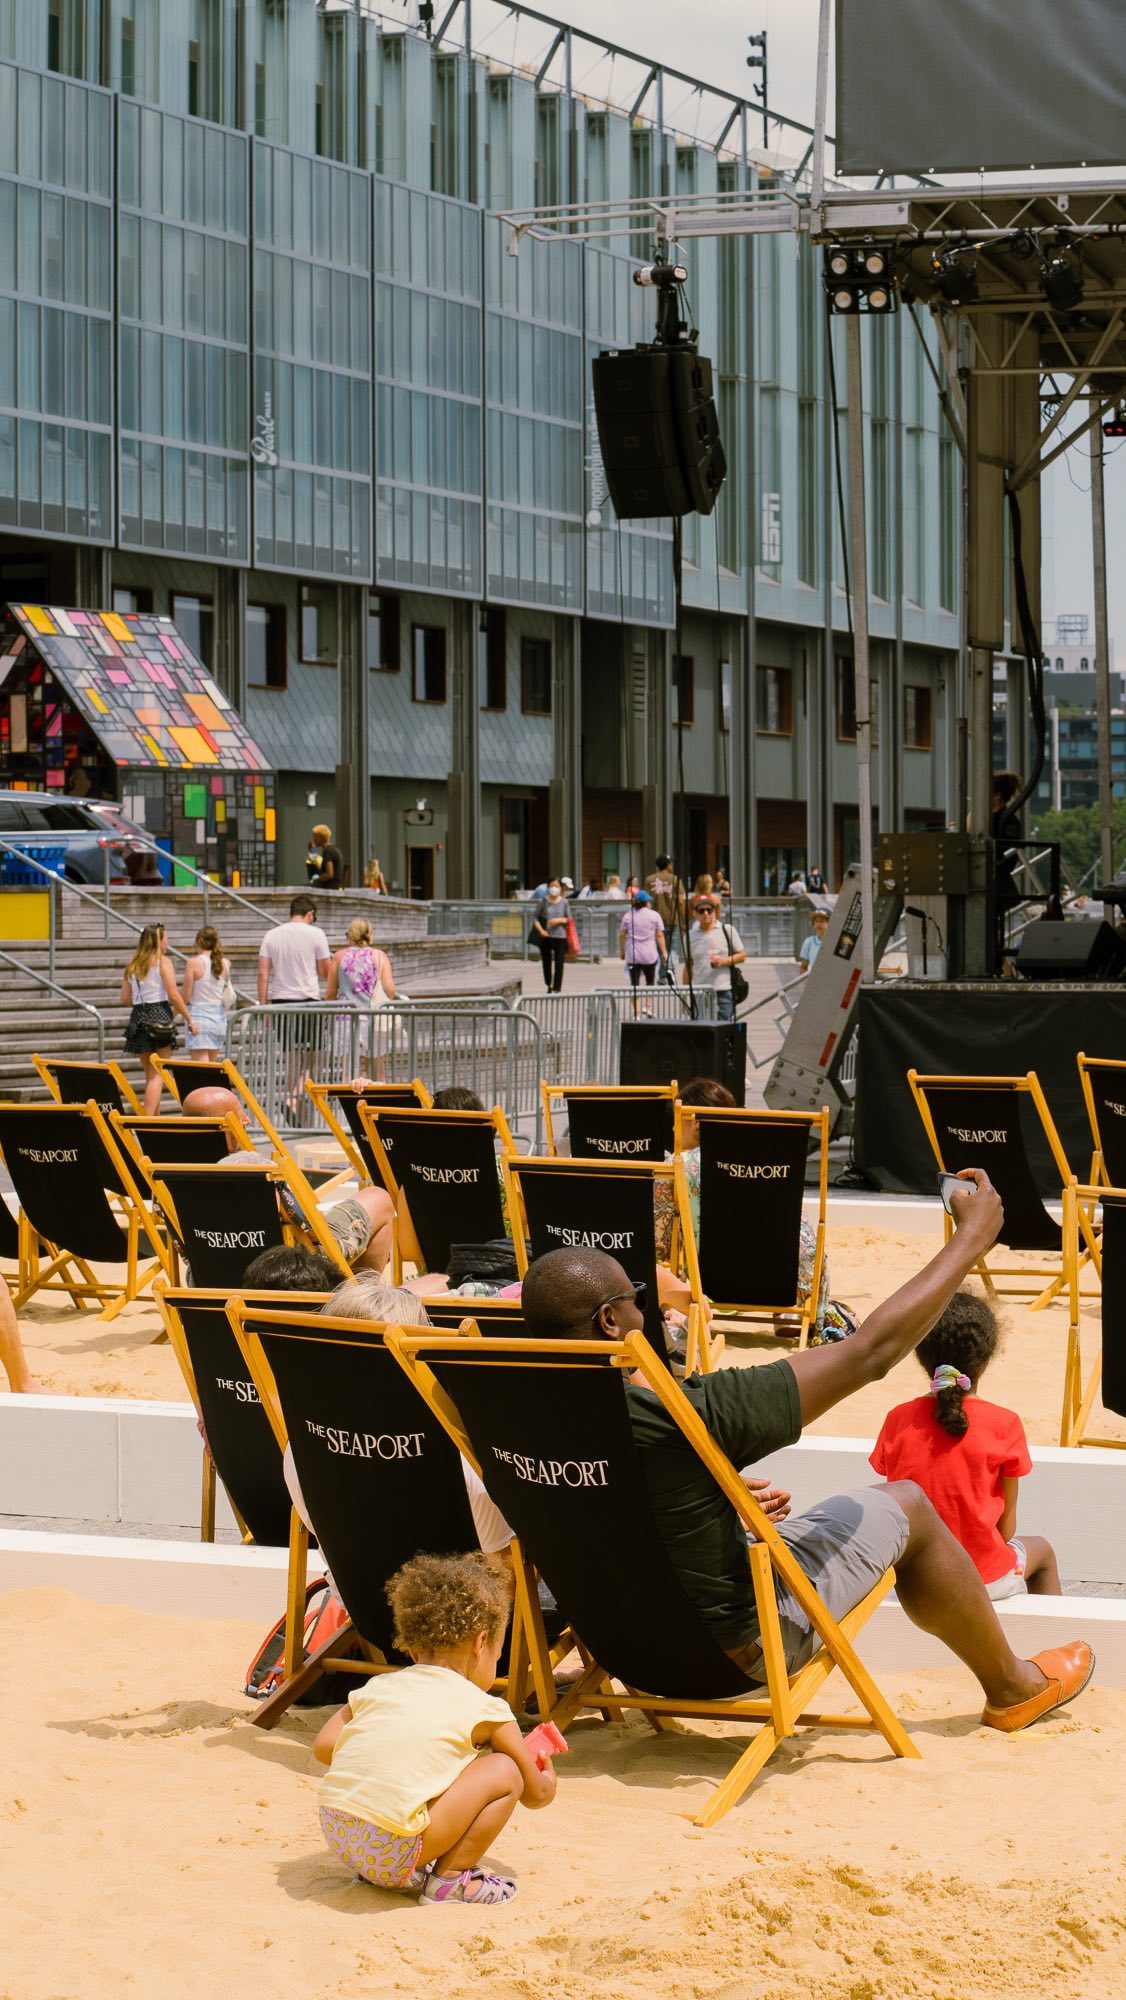 Tmrw is the big day! Grab your sunglasses, beach towels and summer squad and get ready to celebrate at #TheSeaport Beach Fest from July 28–30 😎 🏖️ SEE YOU THERE! Details ➤ link in bio